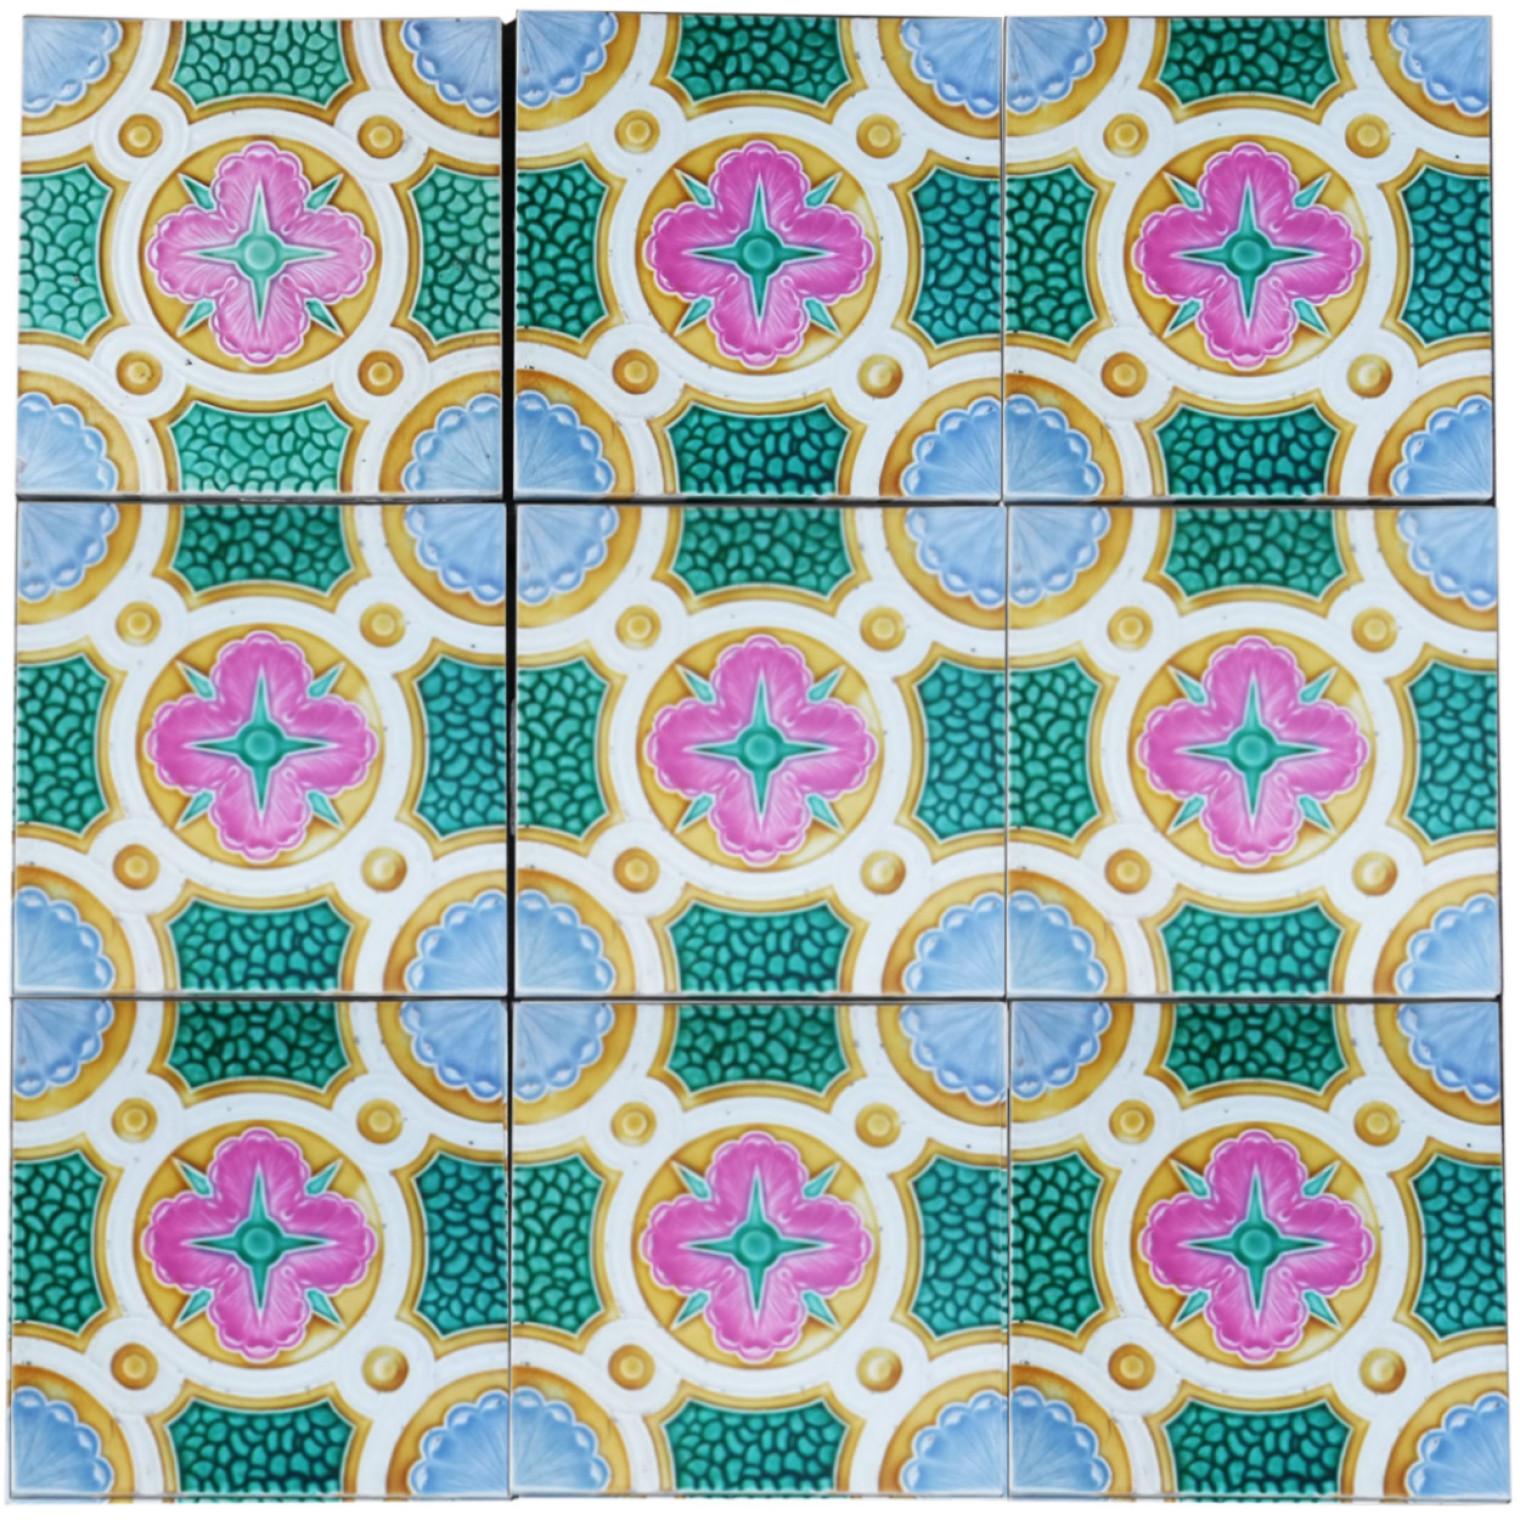 Very colorful and unique handmade ceramic tiles. Manufactured by Faiencerie de Bouffioulx, Belgium, 1920s
Stylized design in wonderful bright colors green, pink, ochre and light blue/gray. These tiles would be charming displayed on easels, framed or